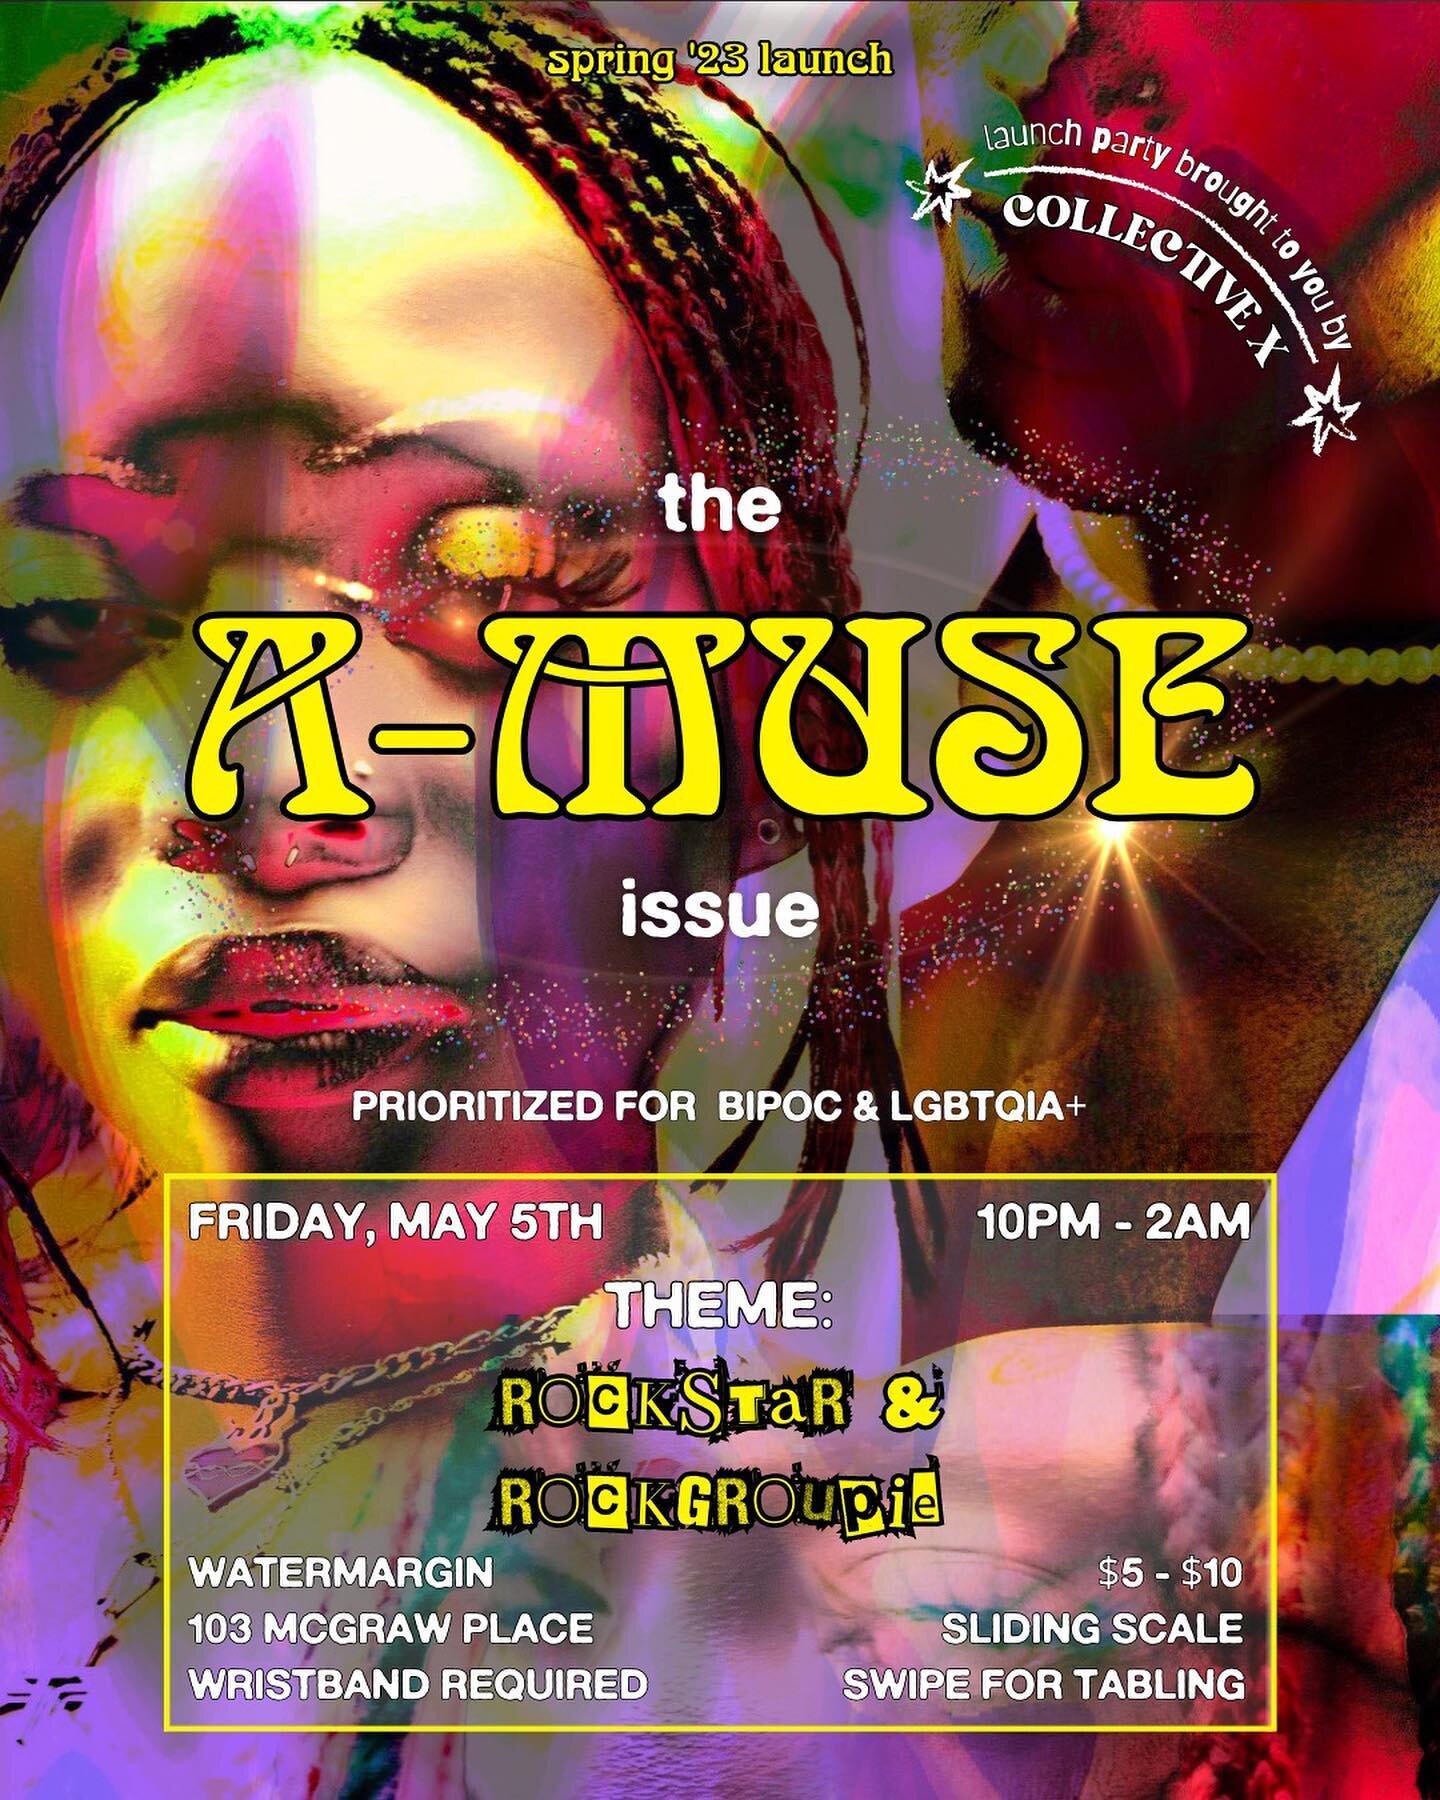 🌟JOIN COLLECTIVE X FOR THE LAUNCH OF ISSUE NO. 12: A-MUSE 🌟

FRIDAY, MAY 5TH @ WATERMARGIN 10PM - 2AM 🪩

THEME: ROCKSTAR AND ROCKGROUPIE 🎸

PURCHASE TIX USING LINK IN BIO AND TABLING STARTS ON MONDAY 🎟️